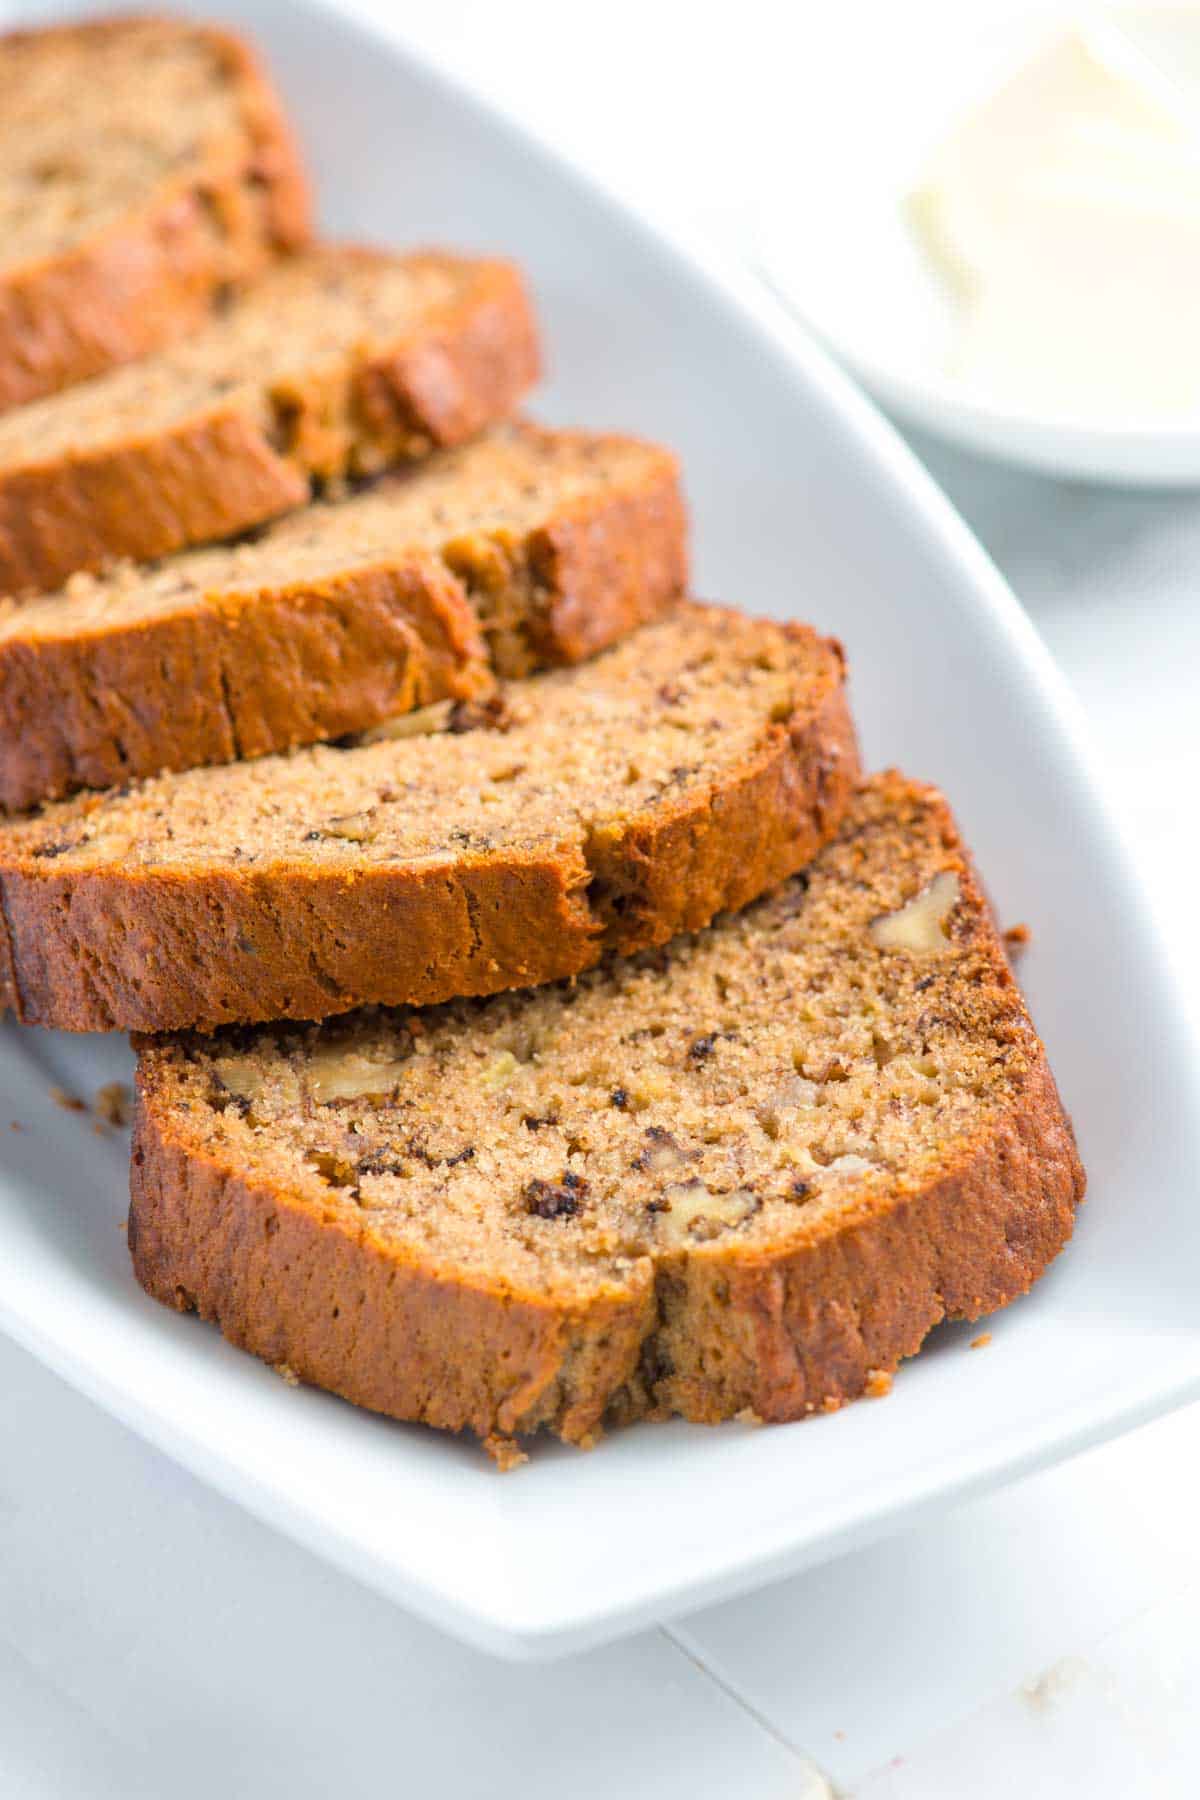 Slices of easy banana bread with walnuts and a moist tender crumb